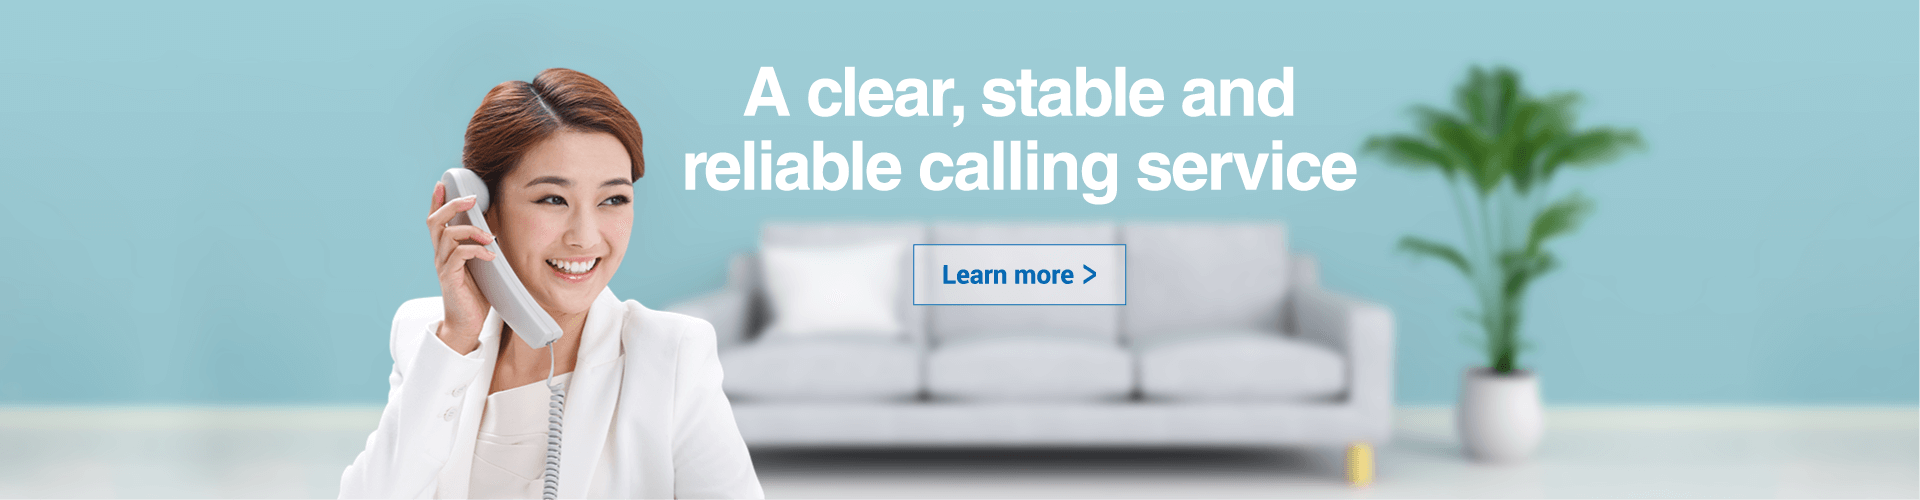 A clear, stable and<br/>reliable calling service